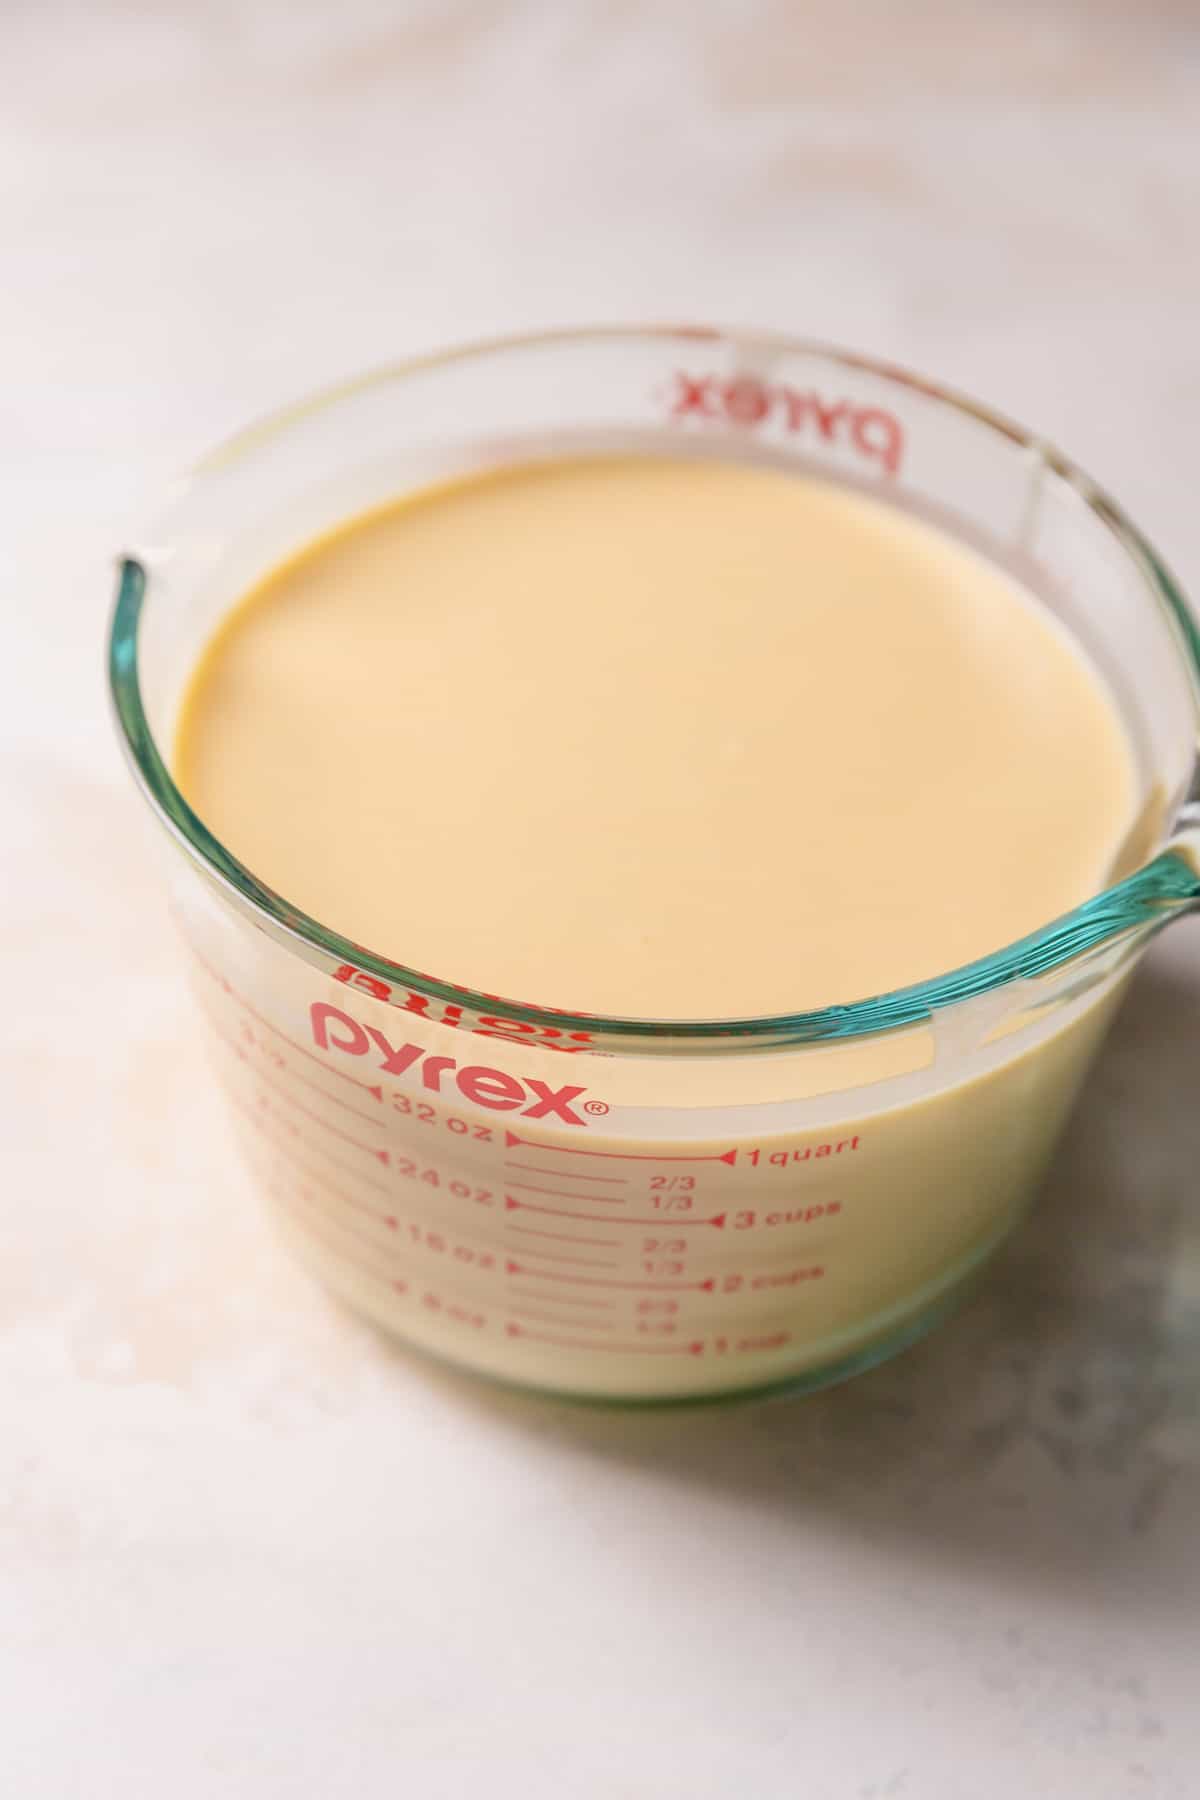 crepe batter in a glass measuring cup.